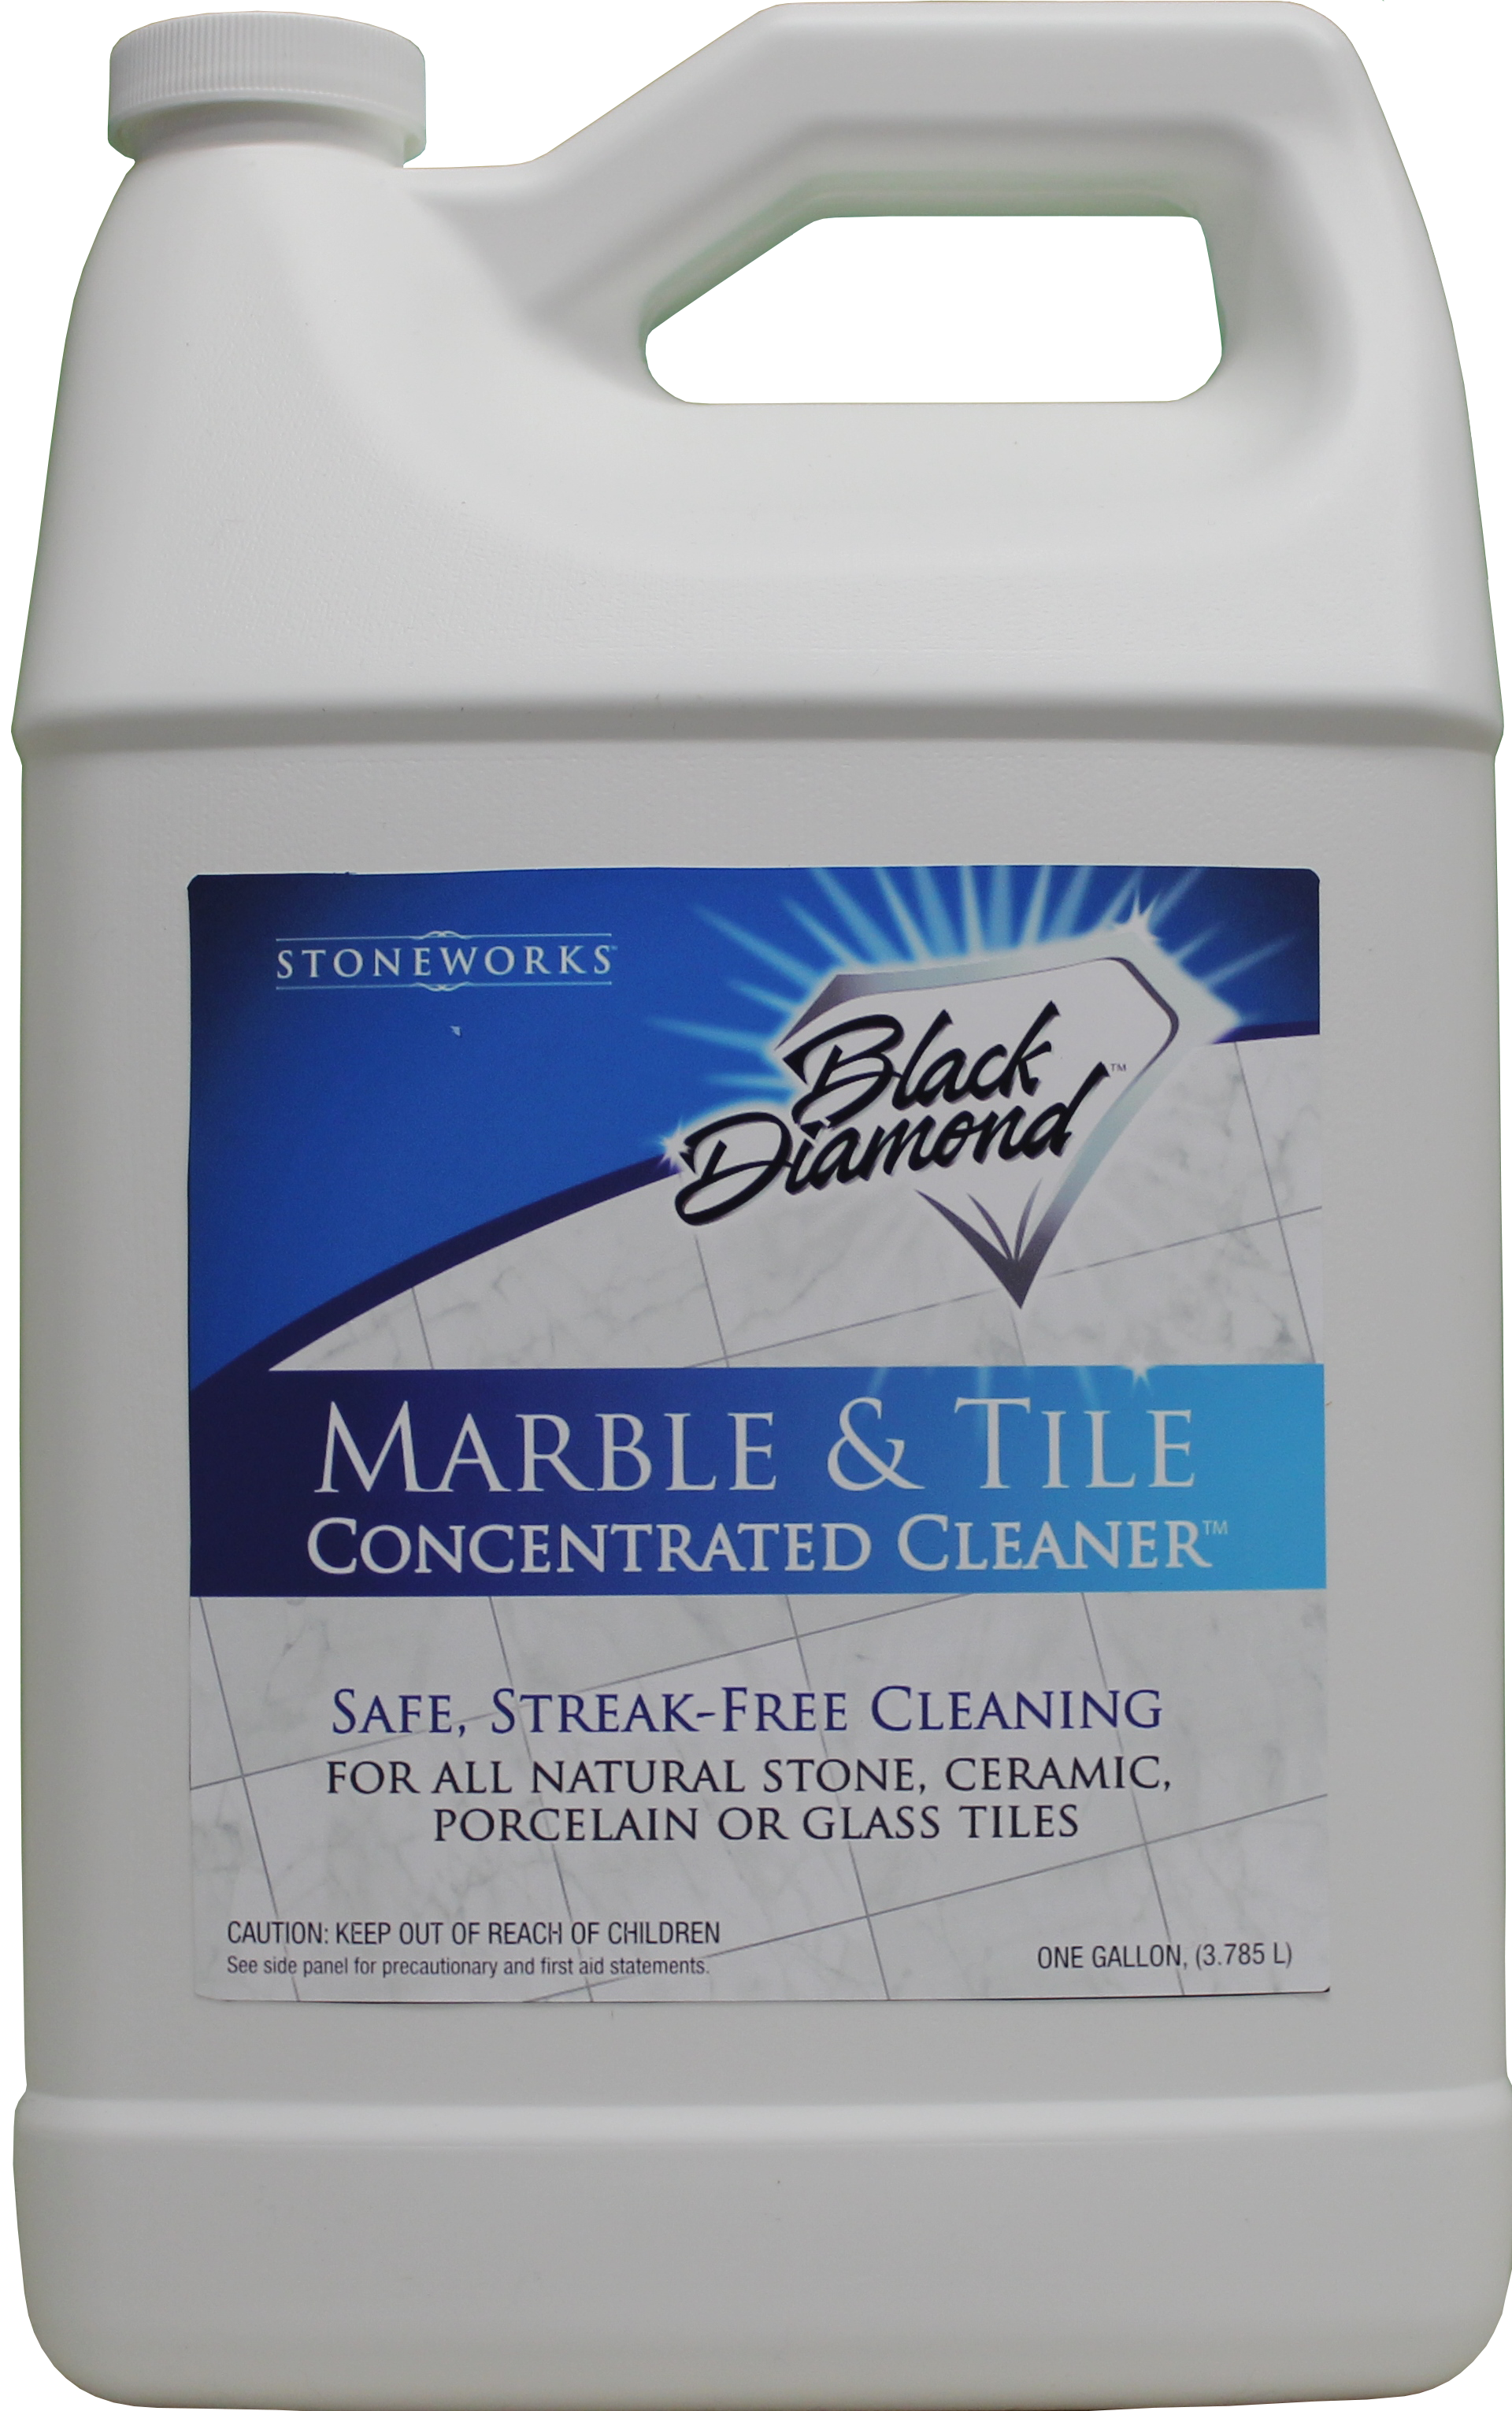 Marble and tile floor cleaner 